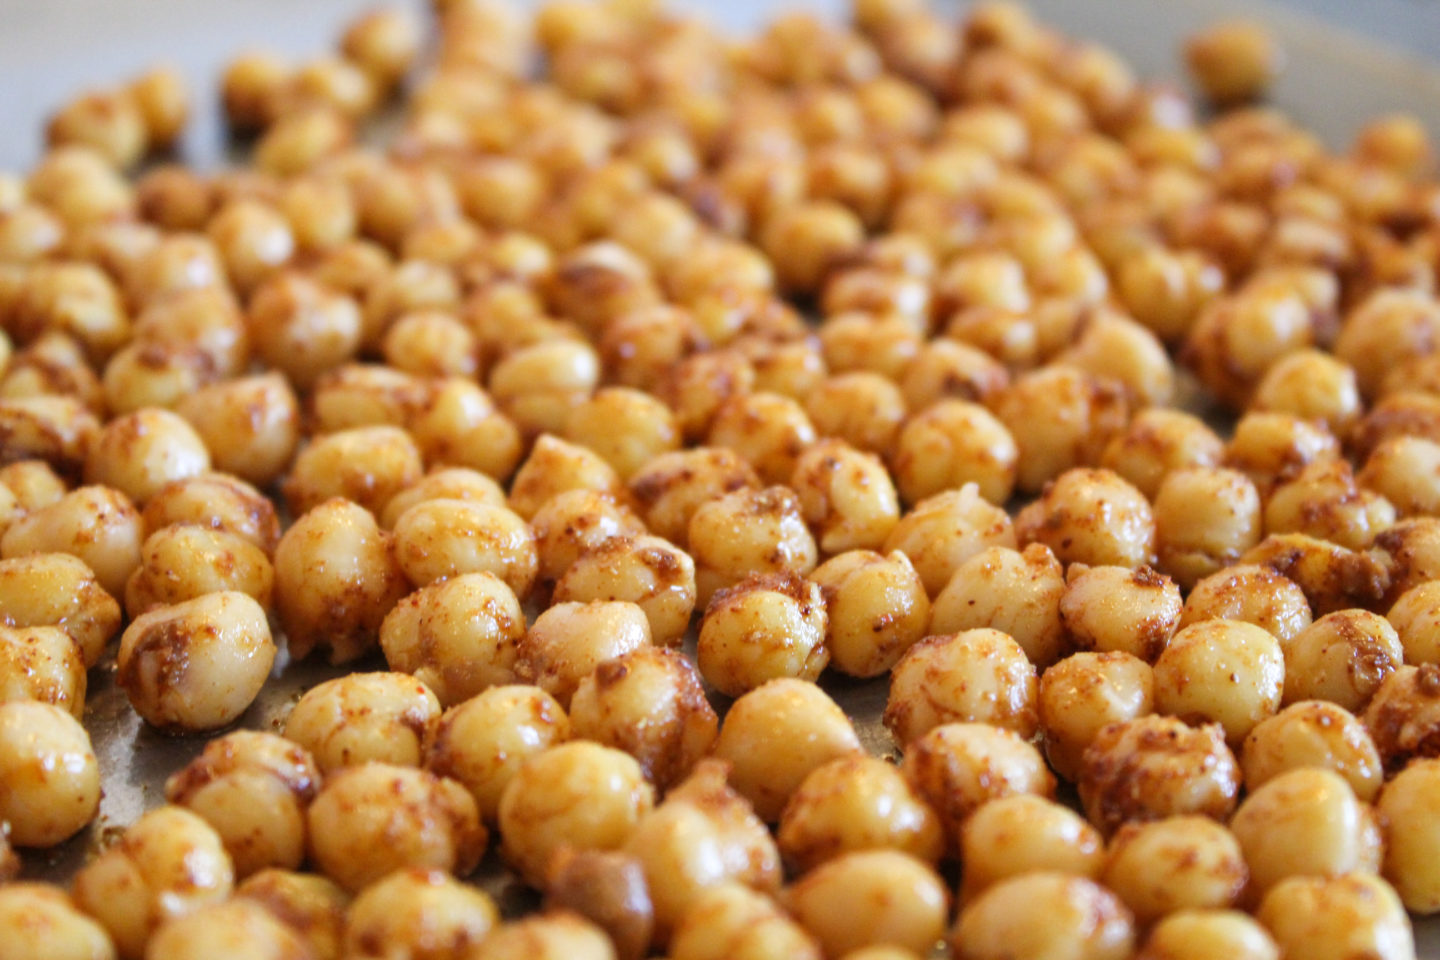 A picture of chili lime roasted chickpeas